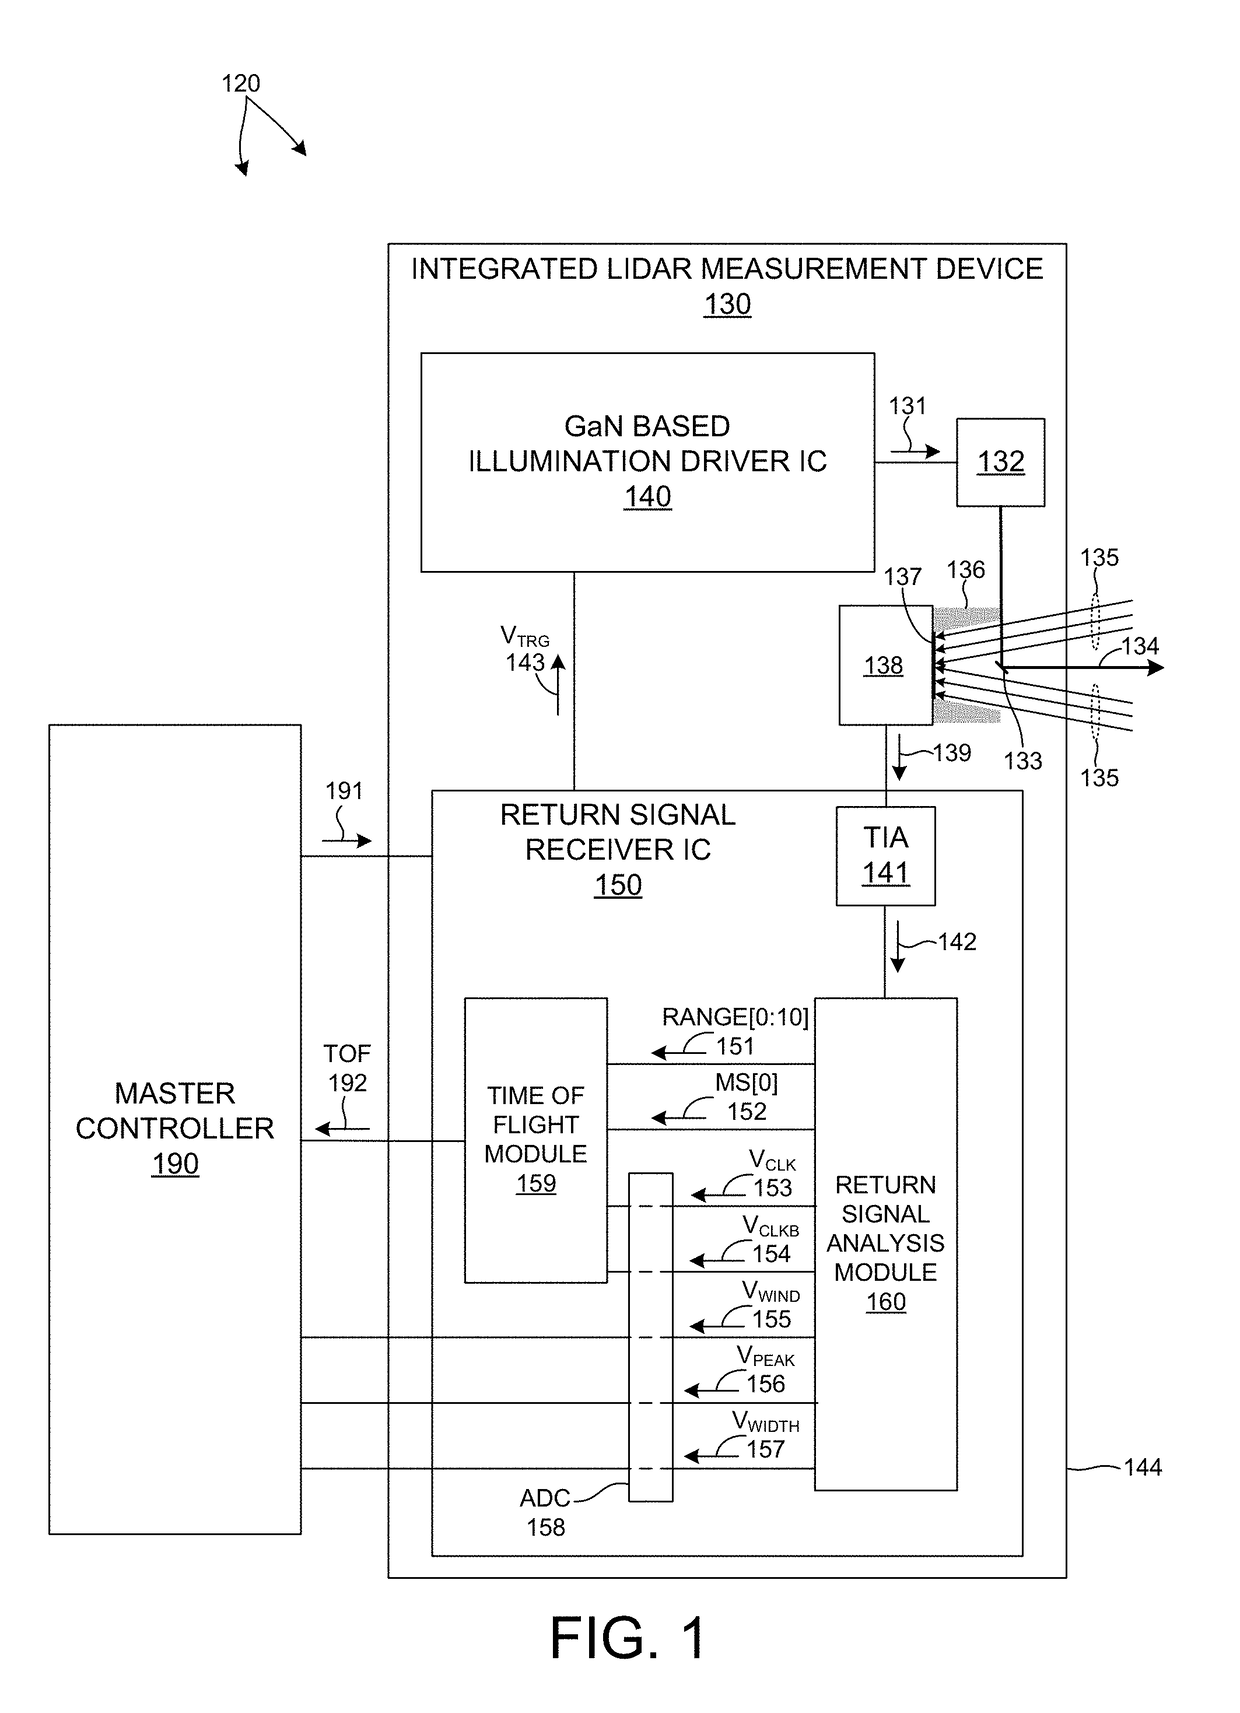 LIDAR Data Acquisition And Control